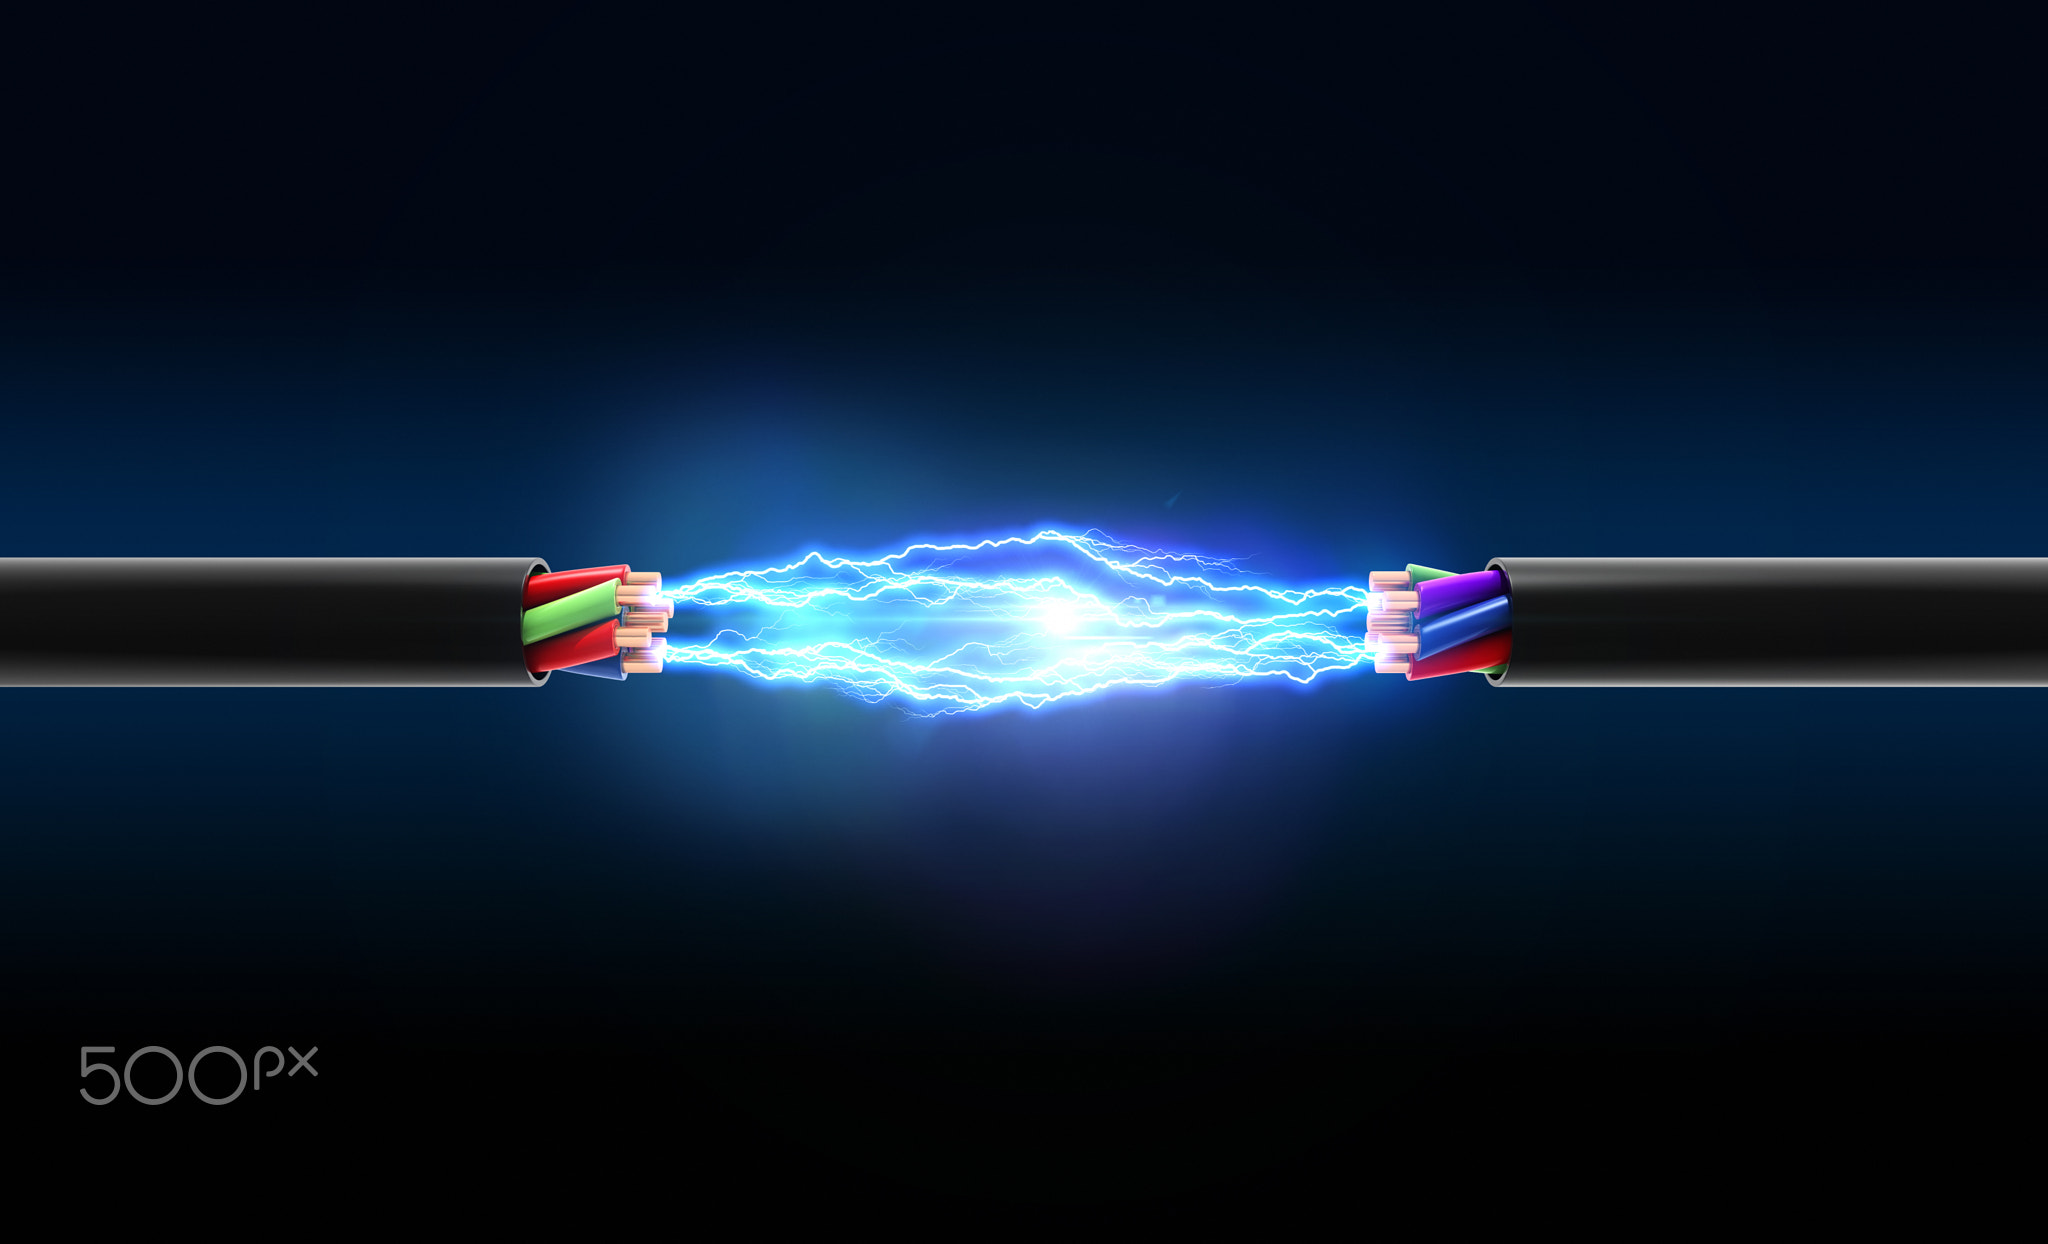 Electrical Spark Between Two Wires Wallpaper